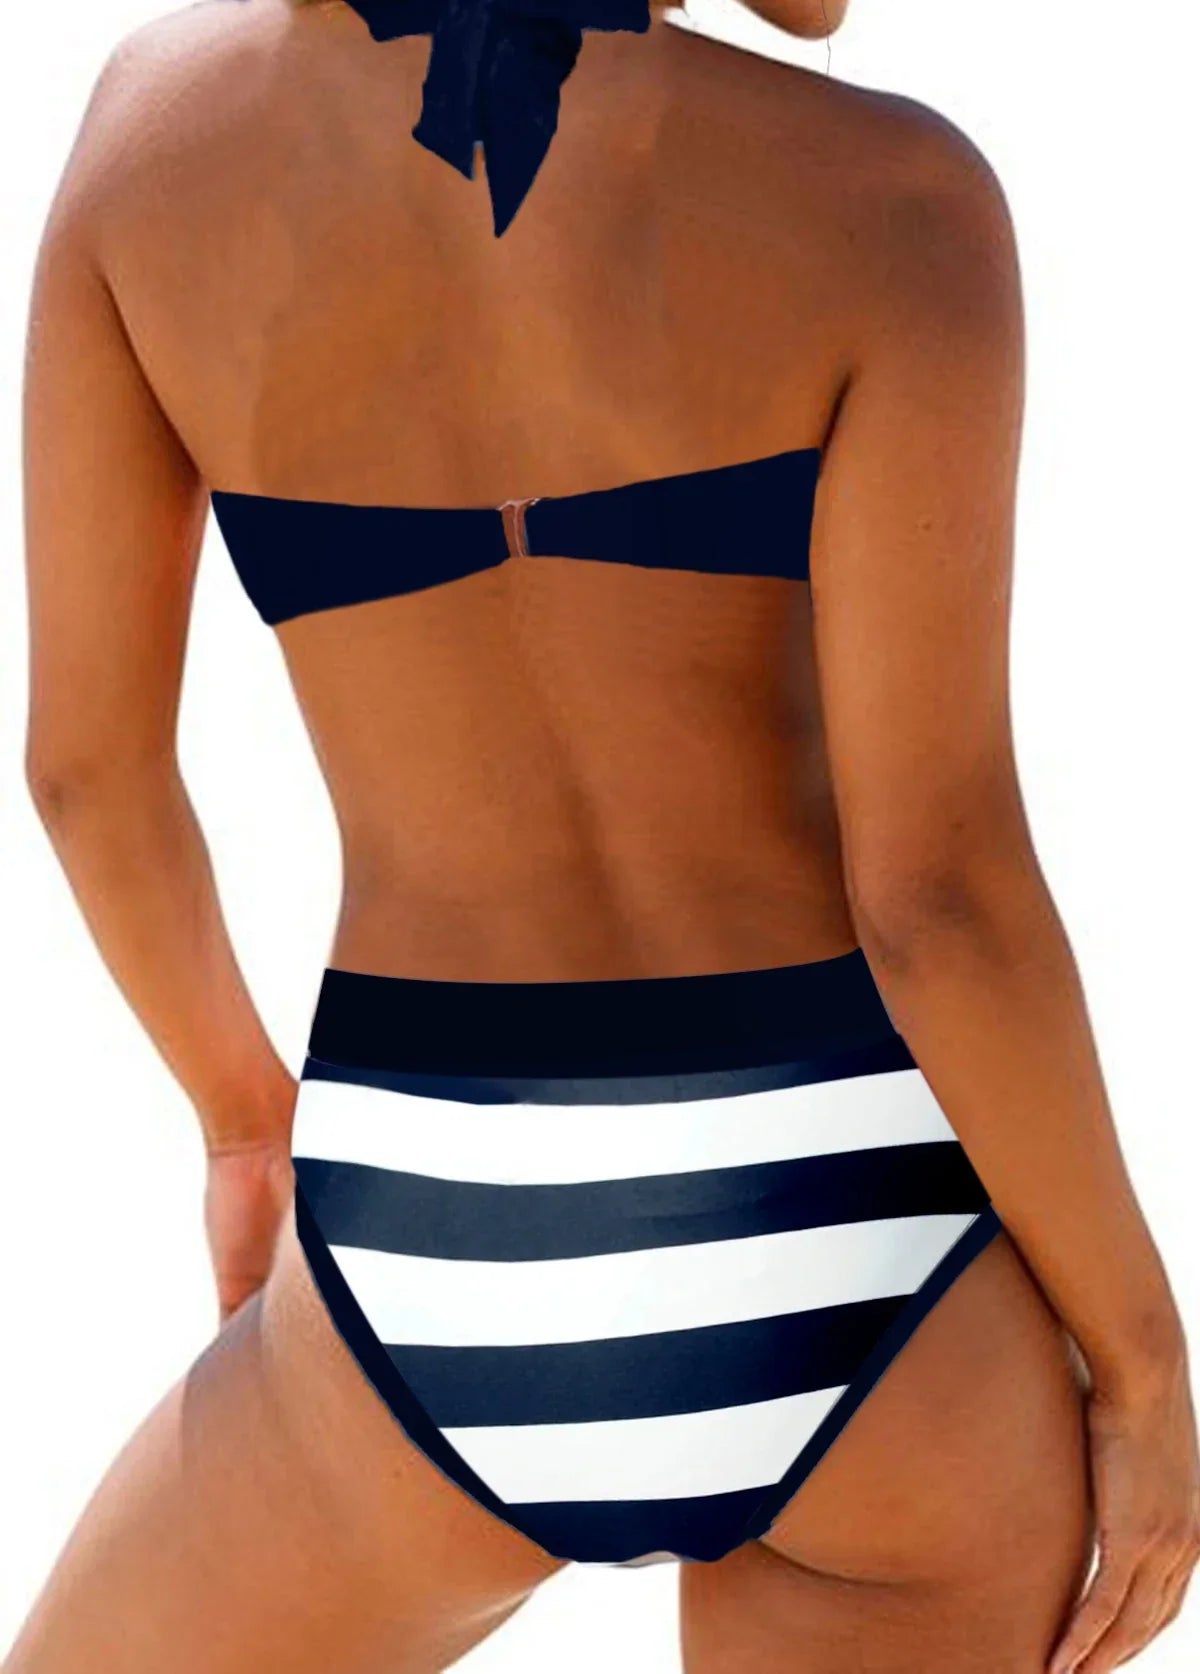 Navy Striped Two-Piece Swimsuit